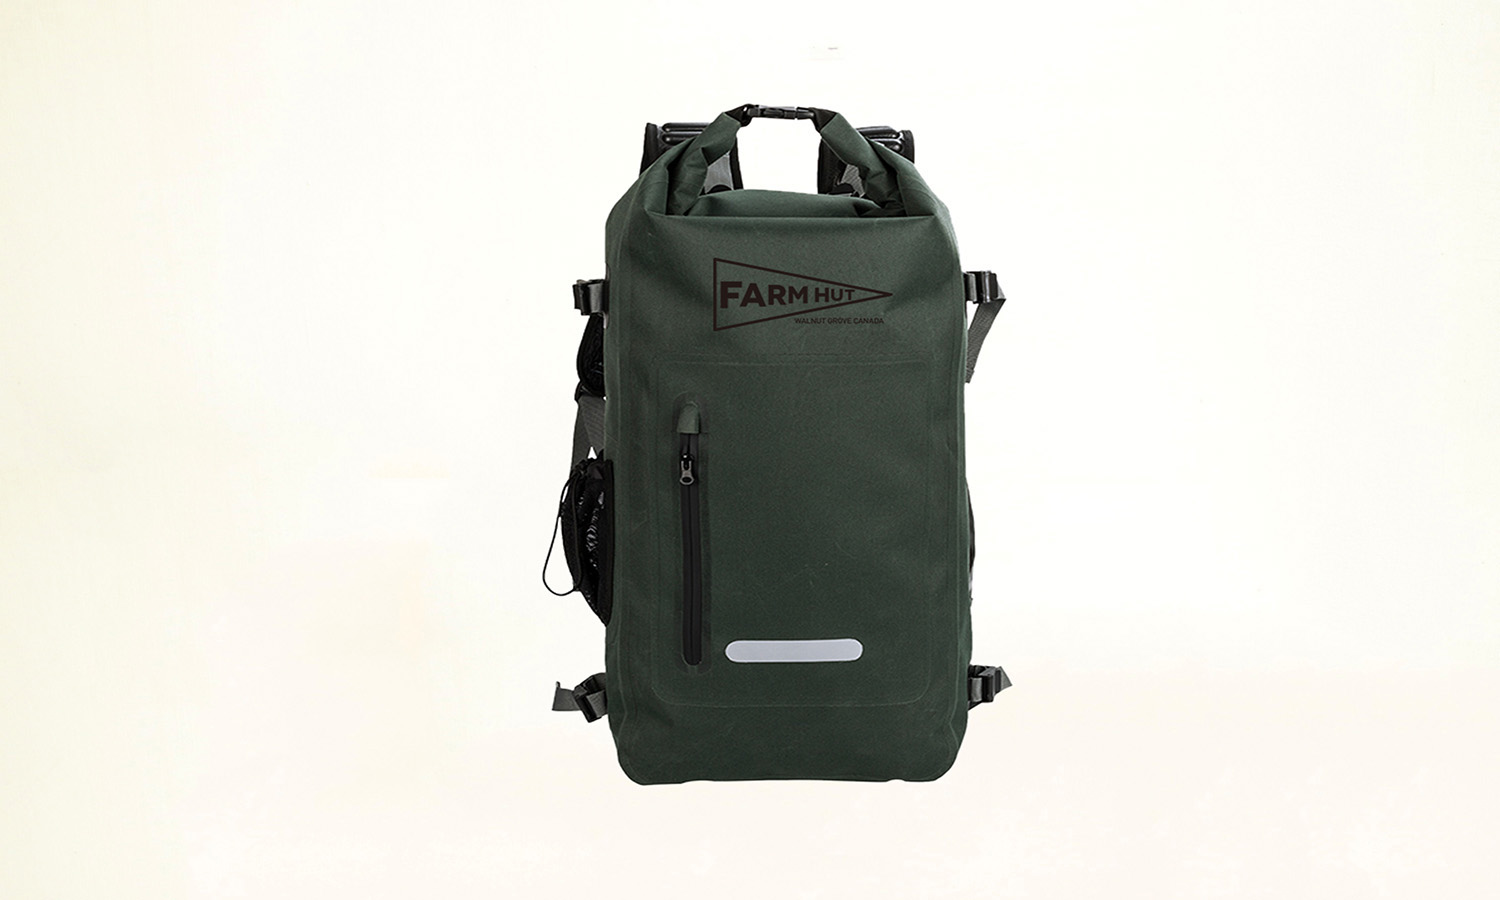 Multifunctional Backpack<br />
Decompression Backpack<br />
Waterproof Backpack<br />
Riding Backpack<br />
(ND-408)